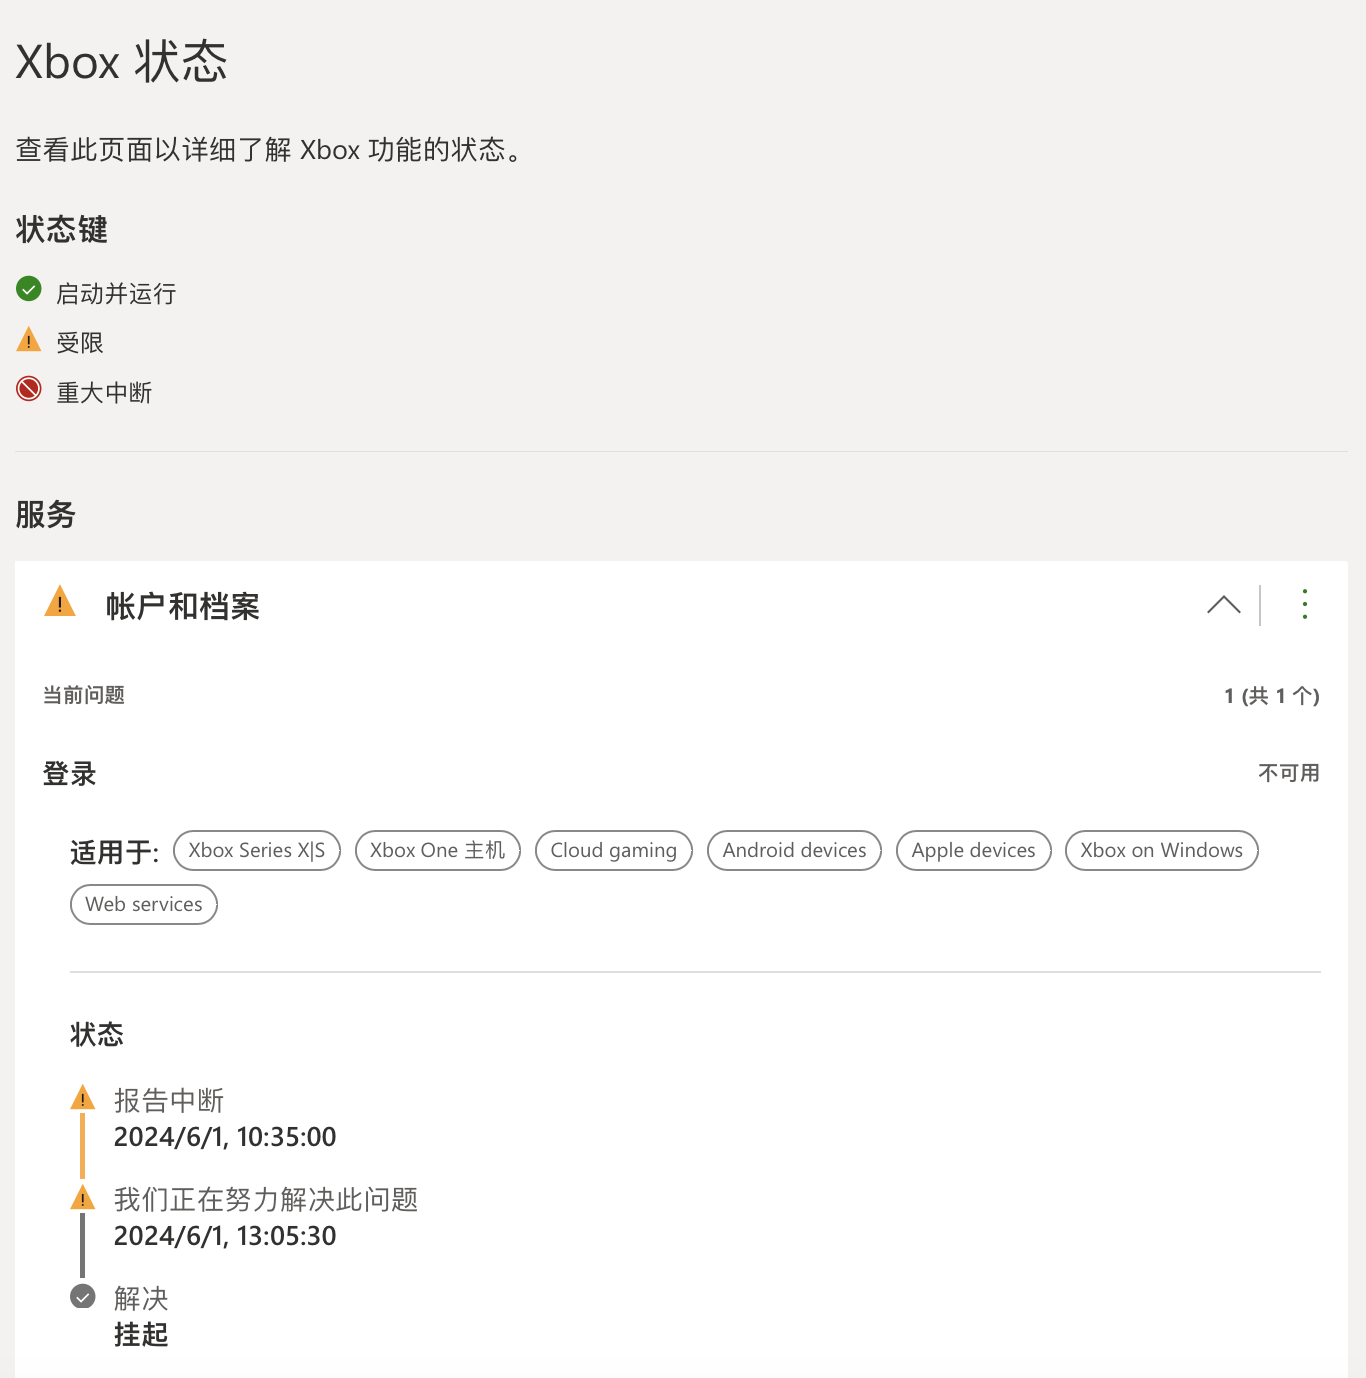 Microsoft Xboxs 'Account and Profile' Service Outage_1